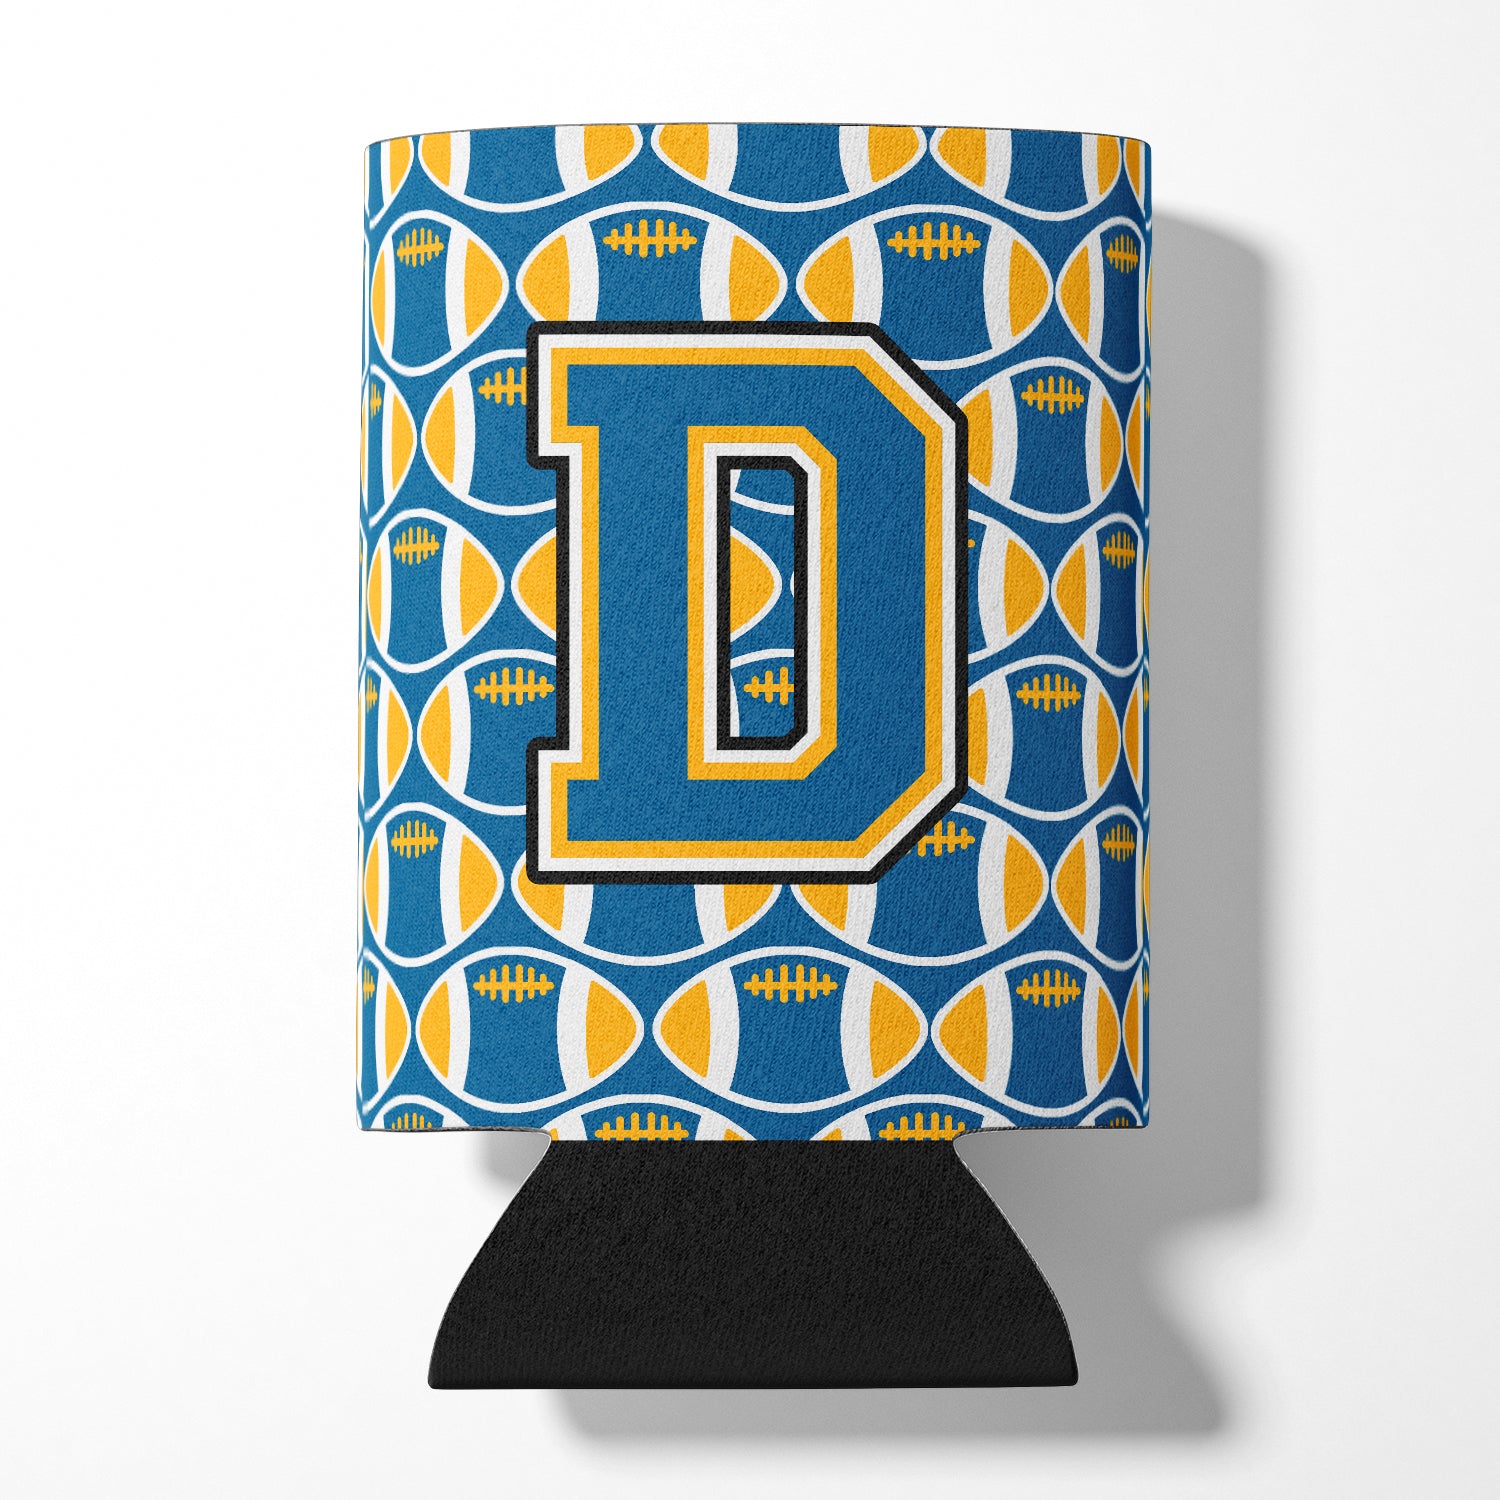 Letter D Football Blue and Gold Can or Bottle Hugger CJ1077-DCC.